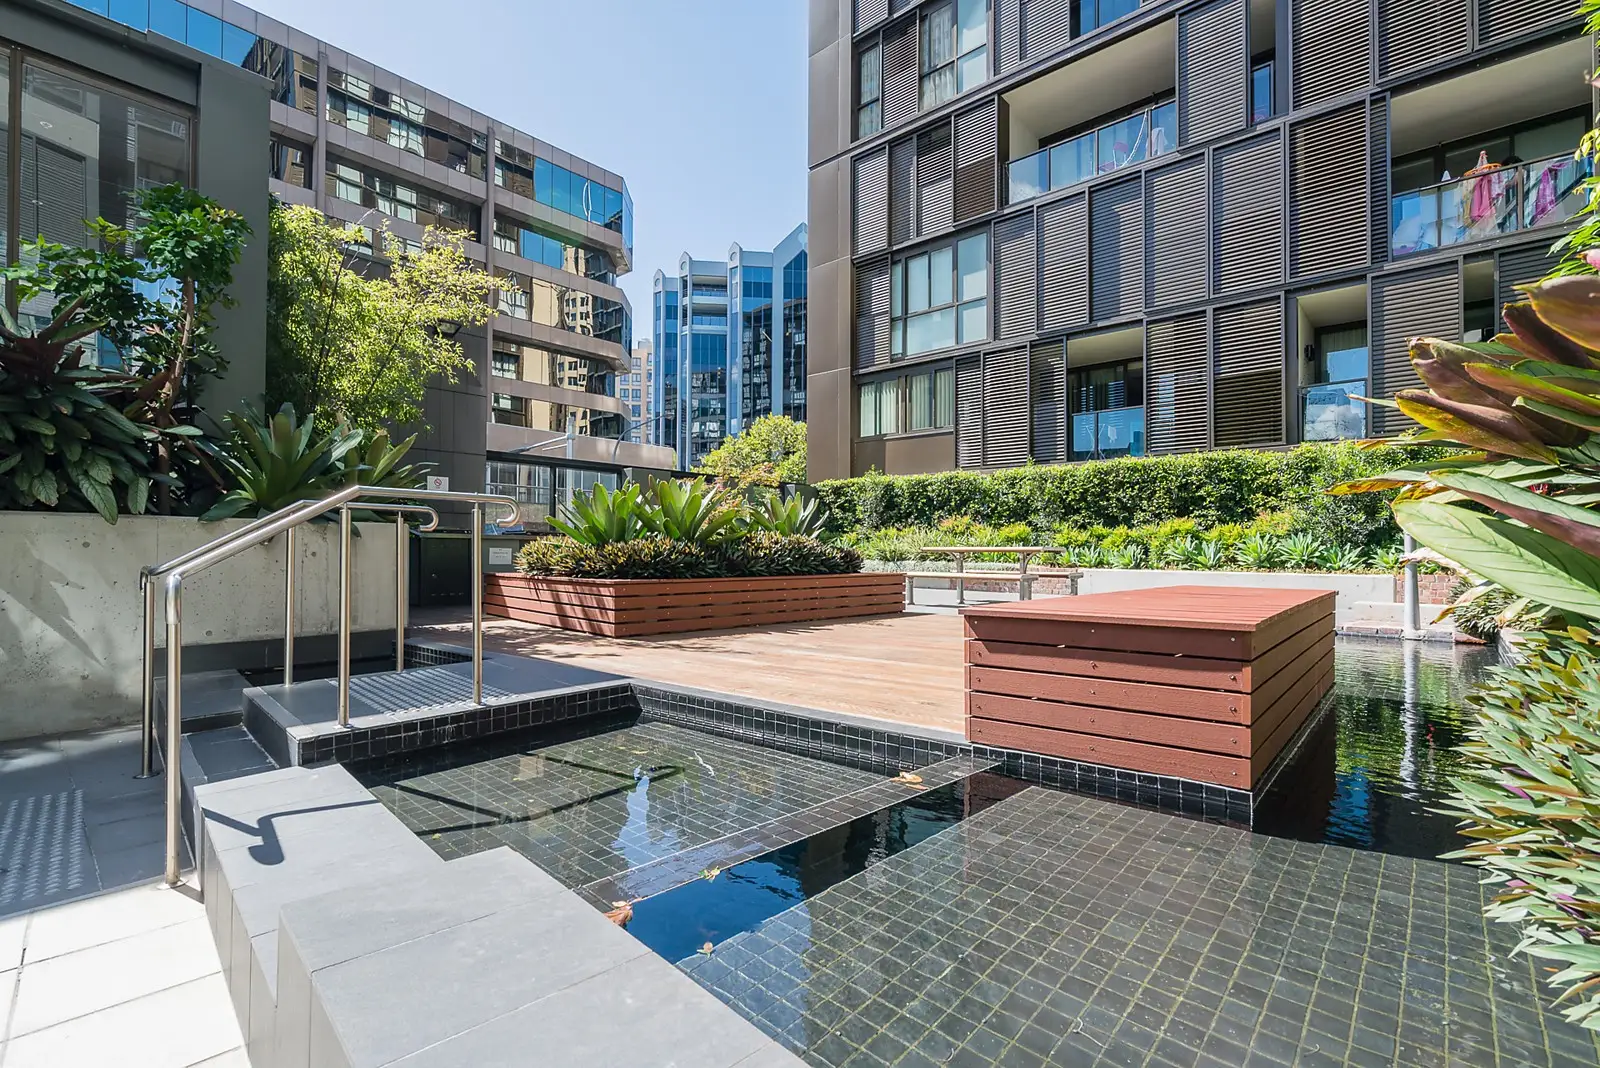 Photo #2: 111/33 Ultimo Road, Sydney - Sold by Sydney Sotheby's International Realty